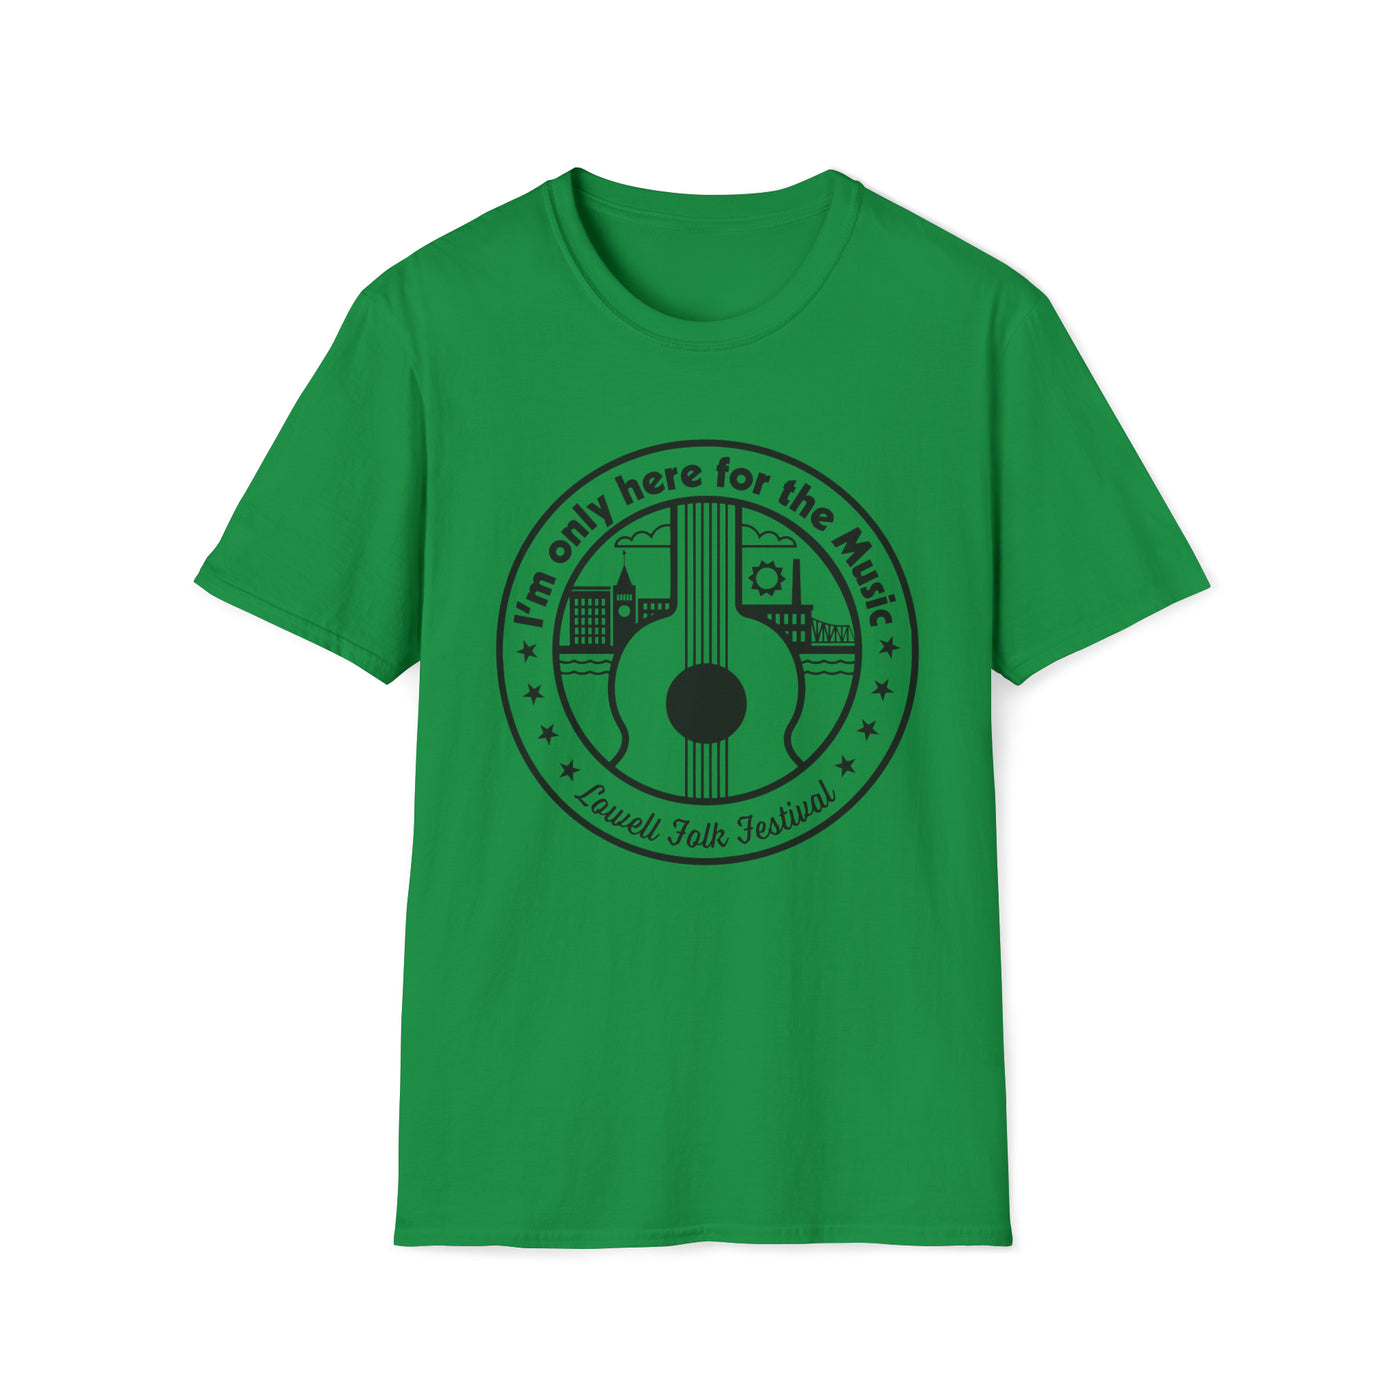 Lowell Folk Festival "Team Tunes" Shirt (10 colors to choose from)